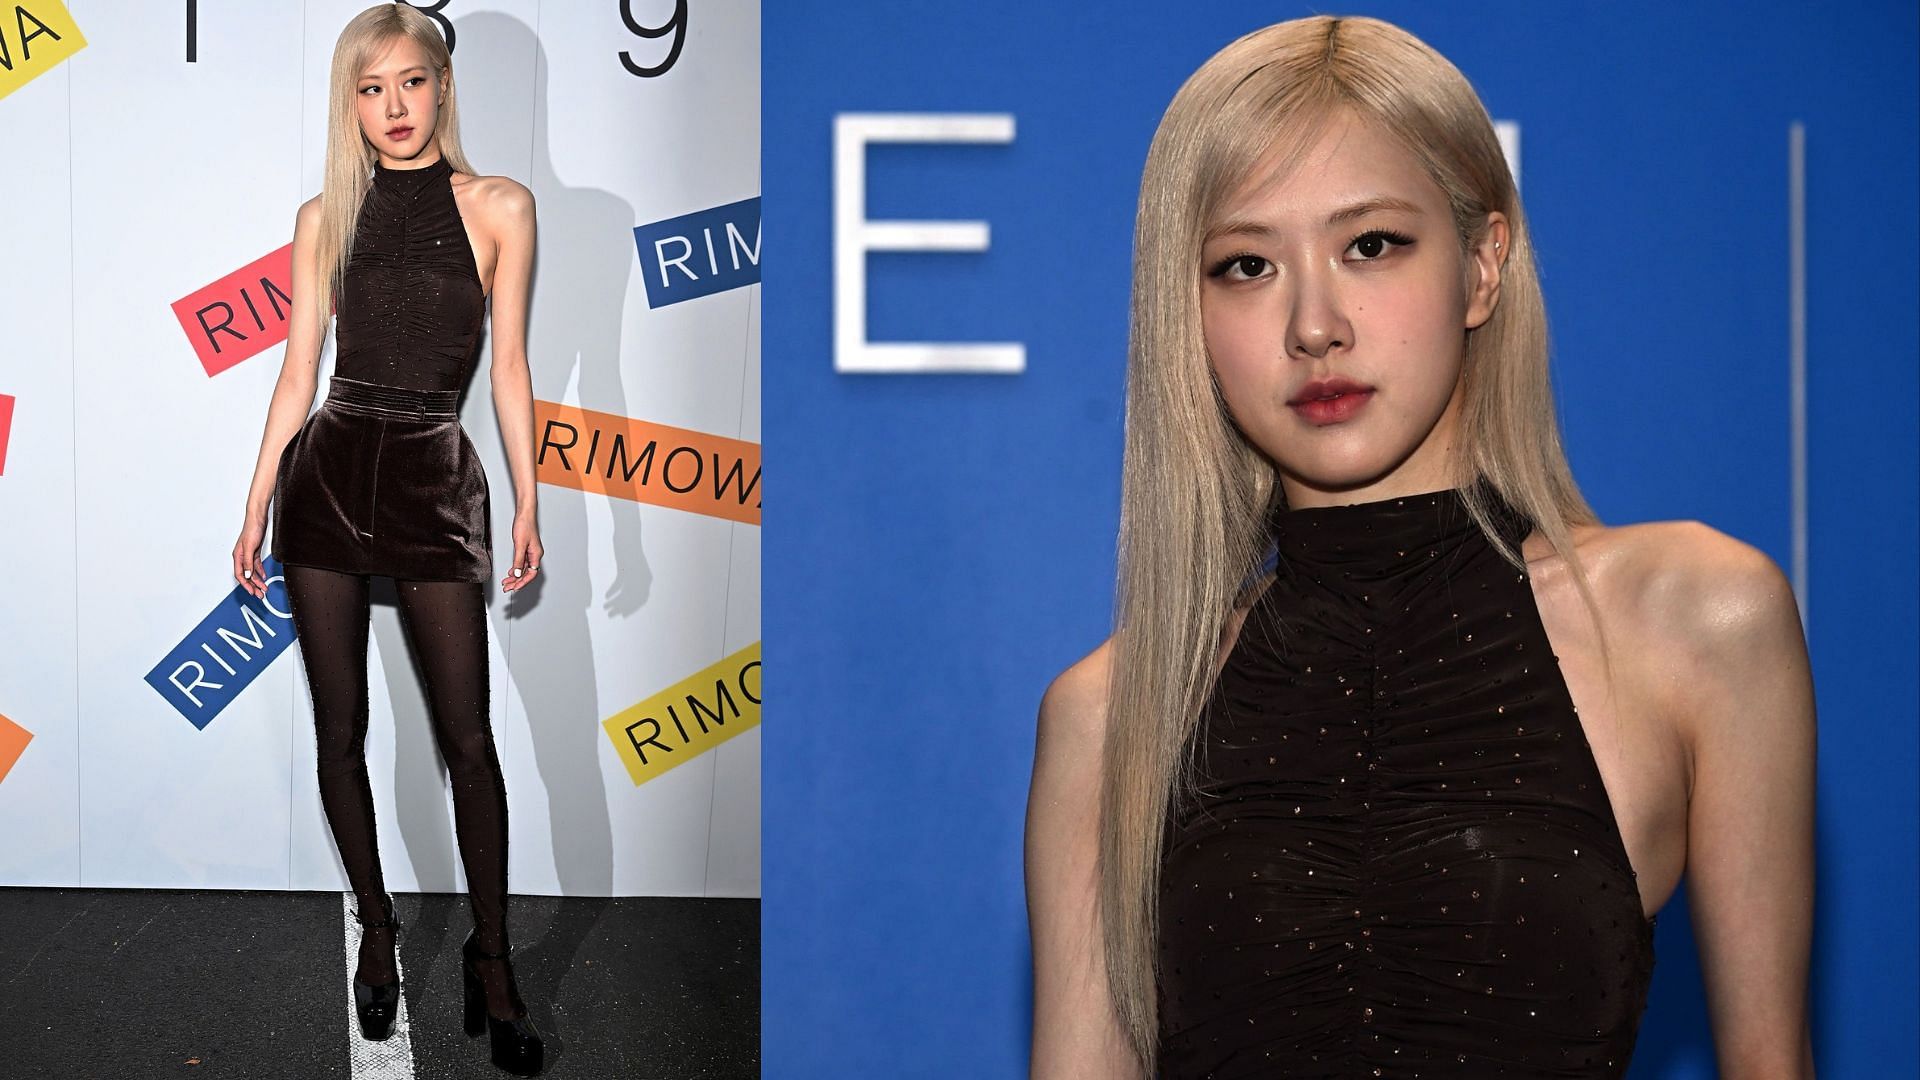 BLACKPINK's Rosé's look for the RIMOWA Seit 1898 event wins the ...